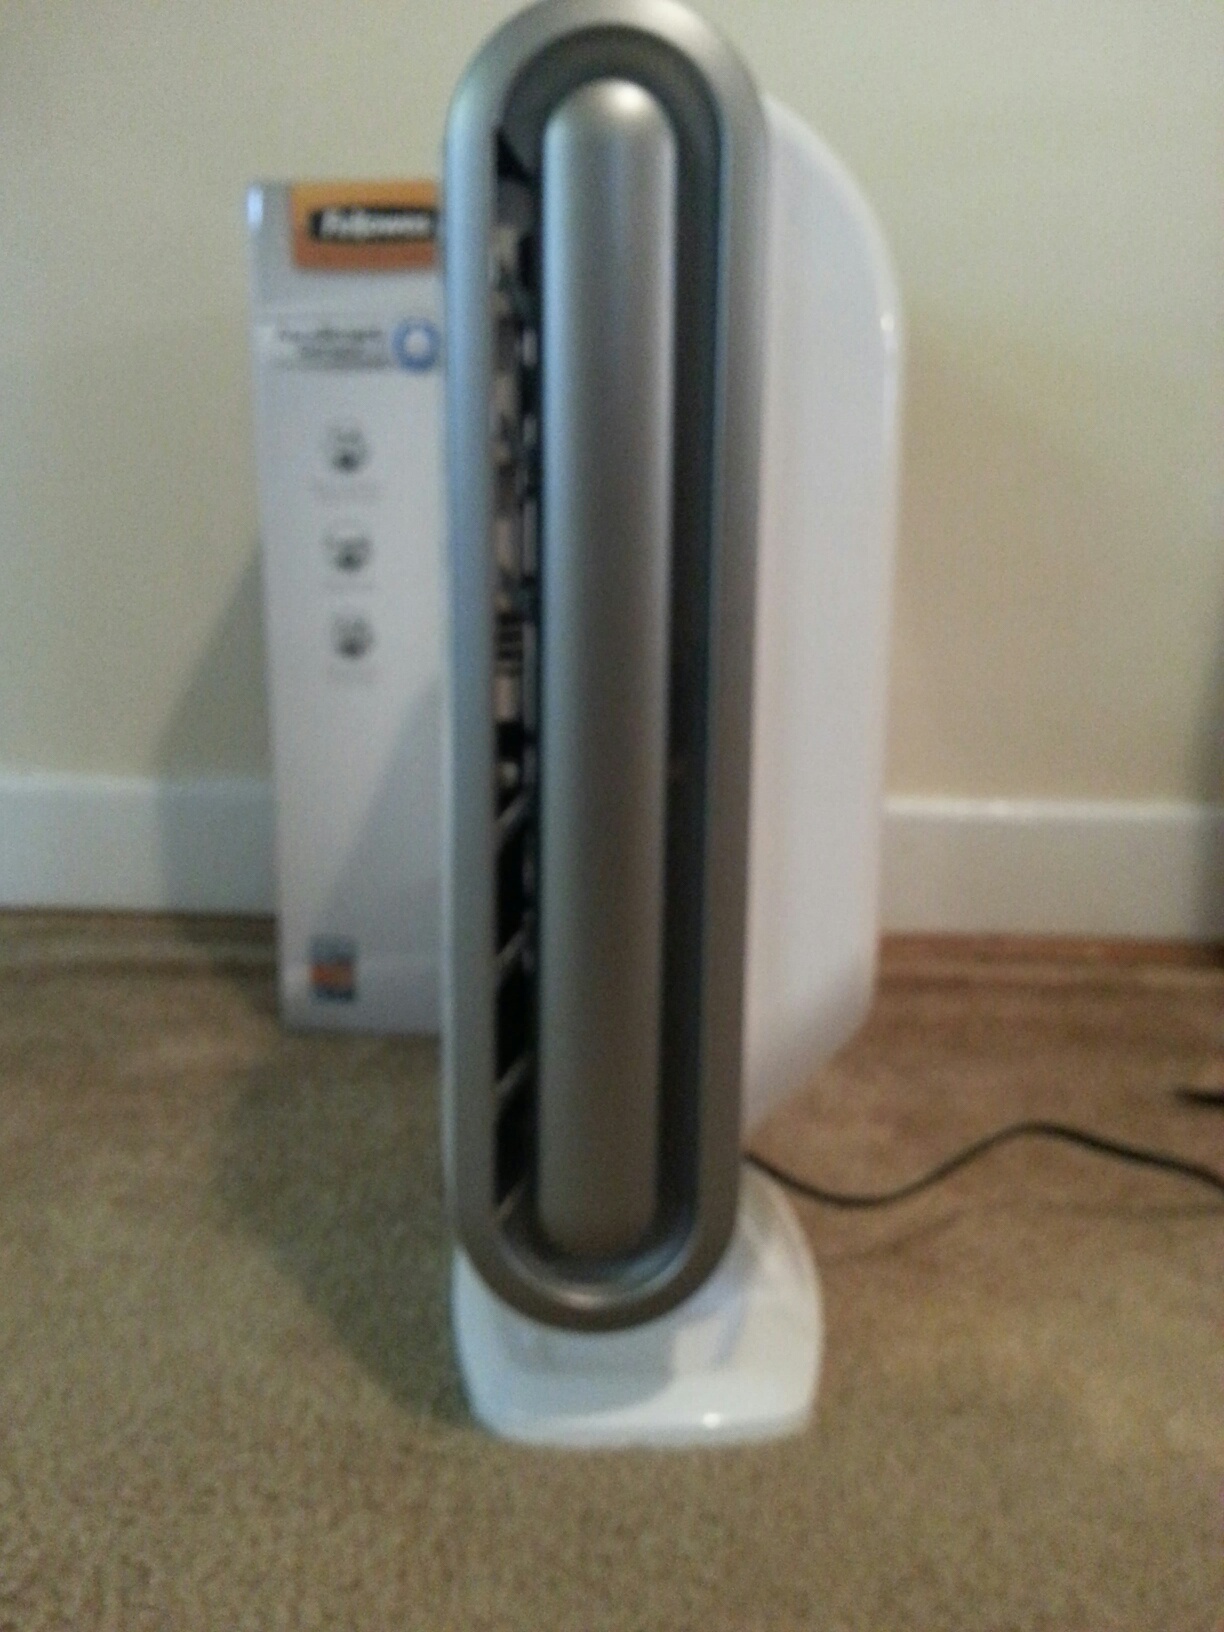 Geek insider, geekinsider, geekinsider. Com,, fellowes aeramax dx55 air purifier review - kick cold and flu season to the curb! , uncategorized